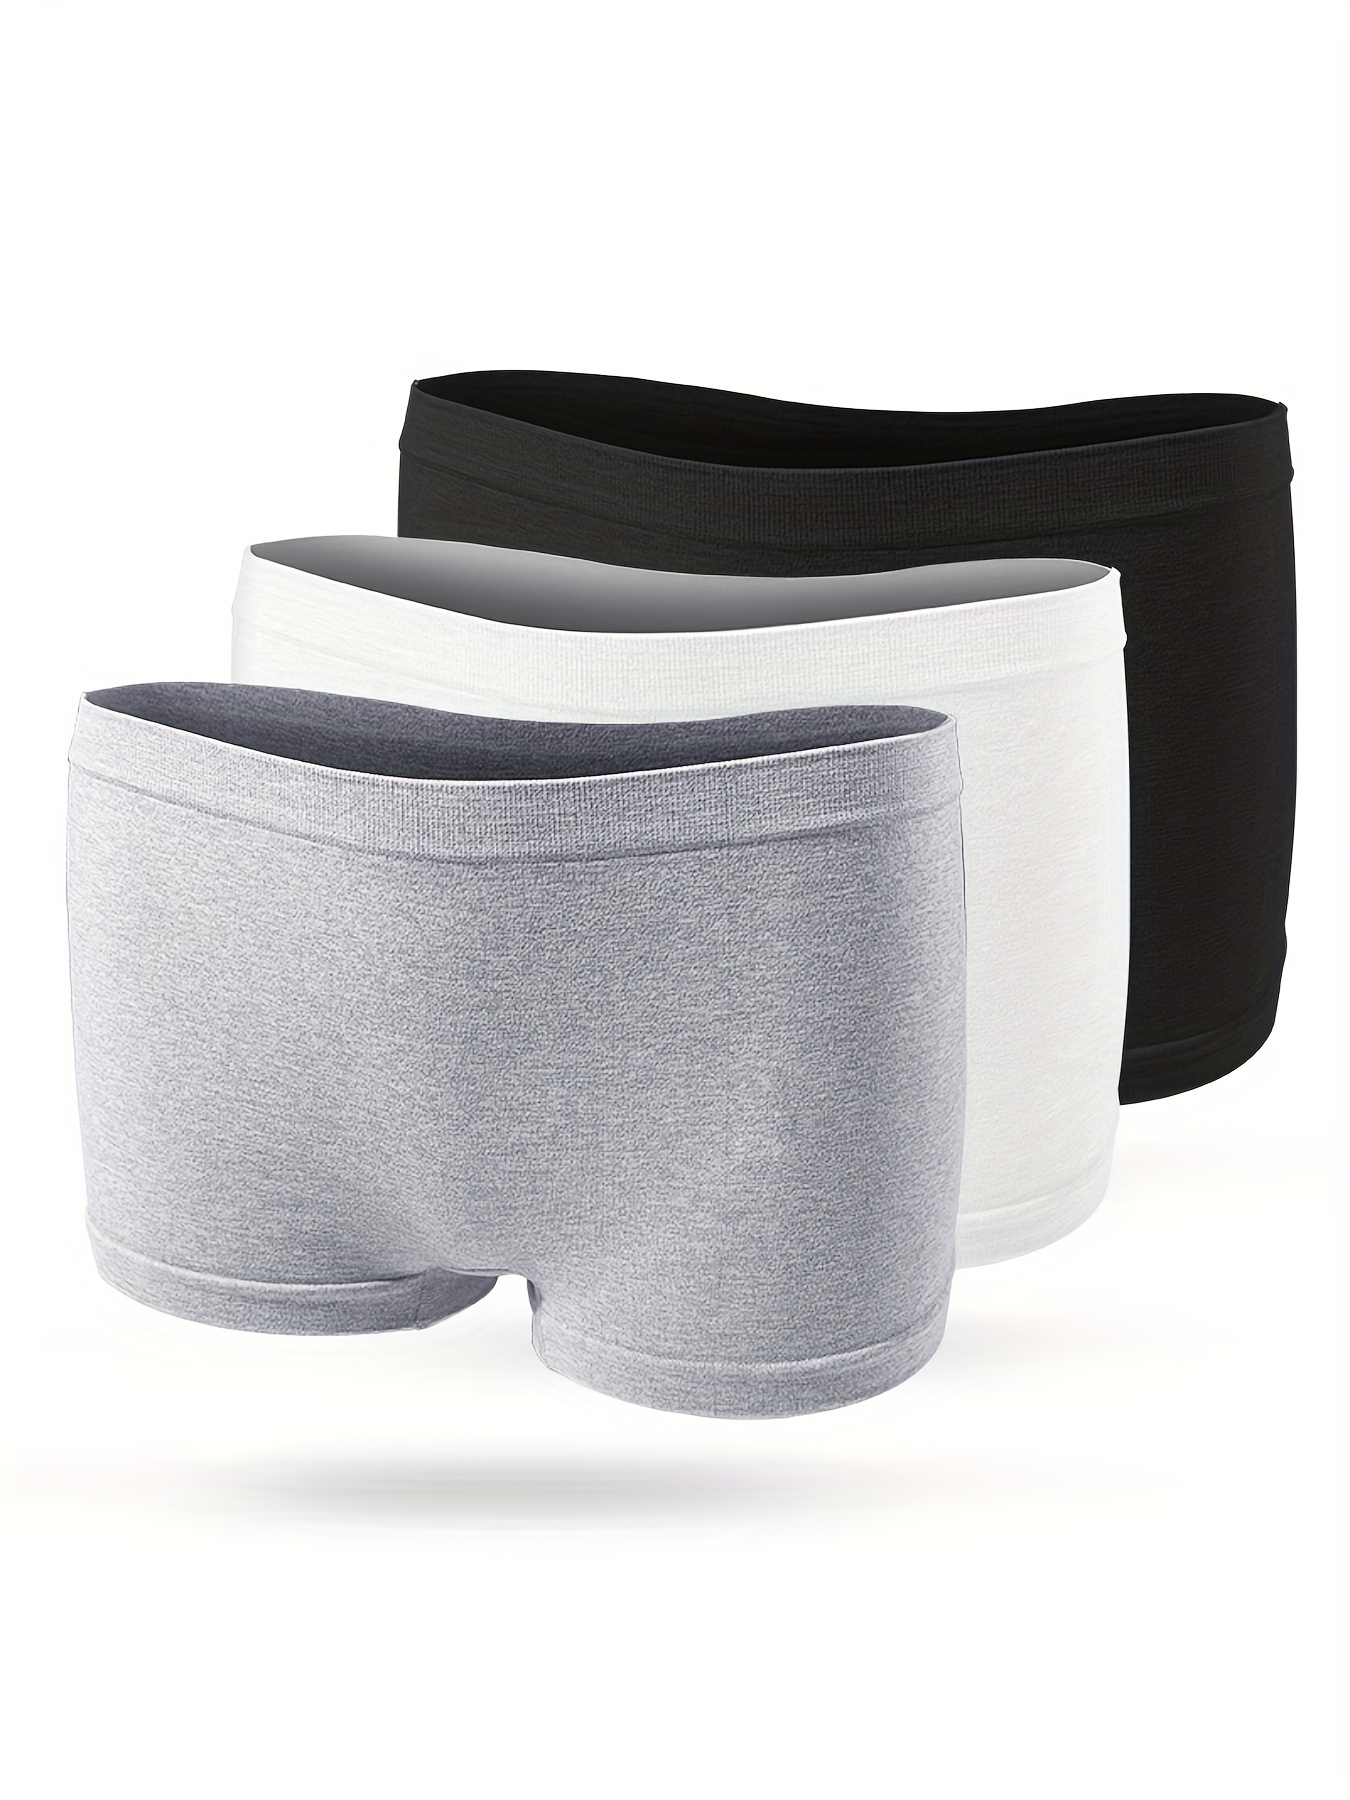 Simple Solid Boyshorts, Comfy Seamless Boxer Shorts, Women's Lingerie &  Underwear